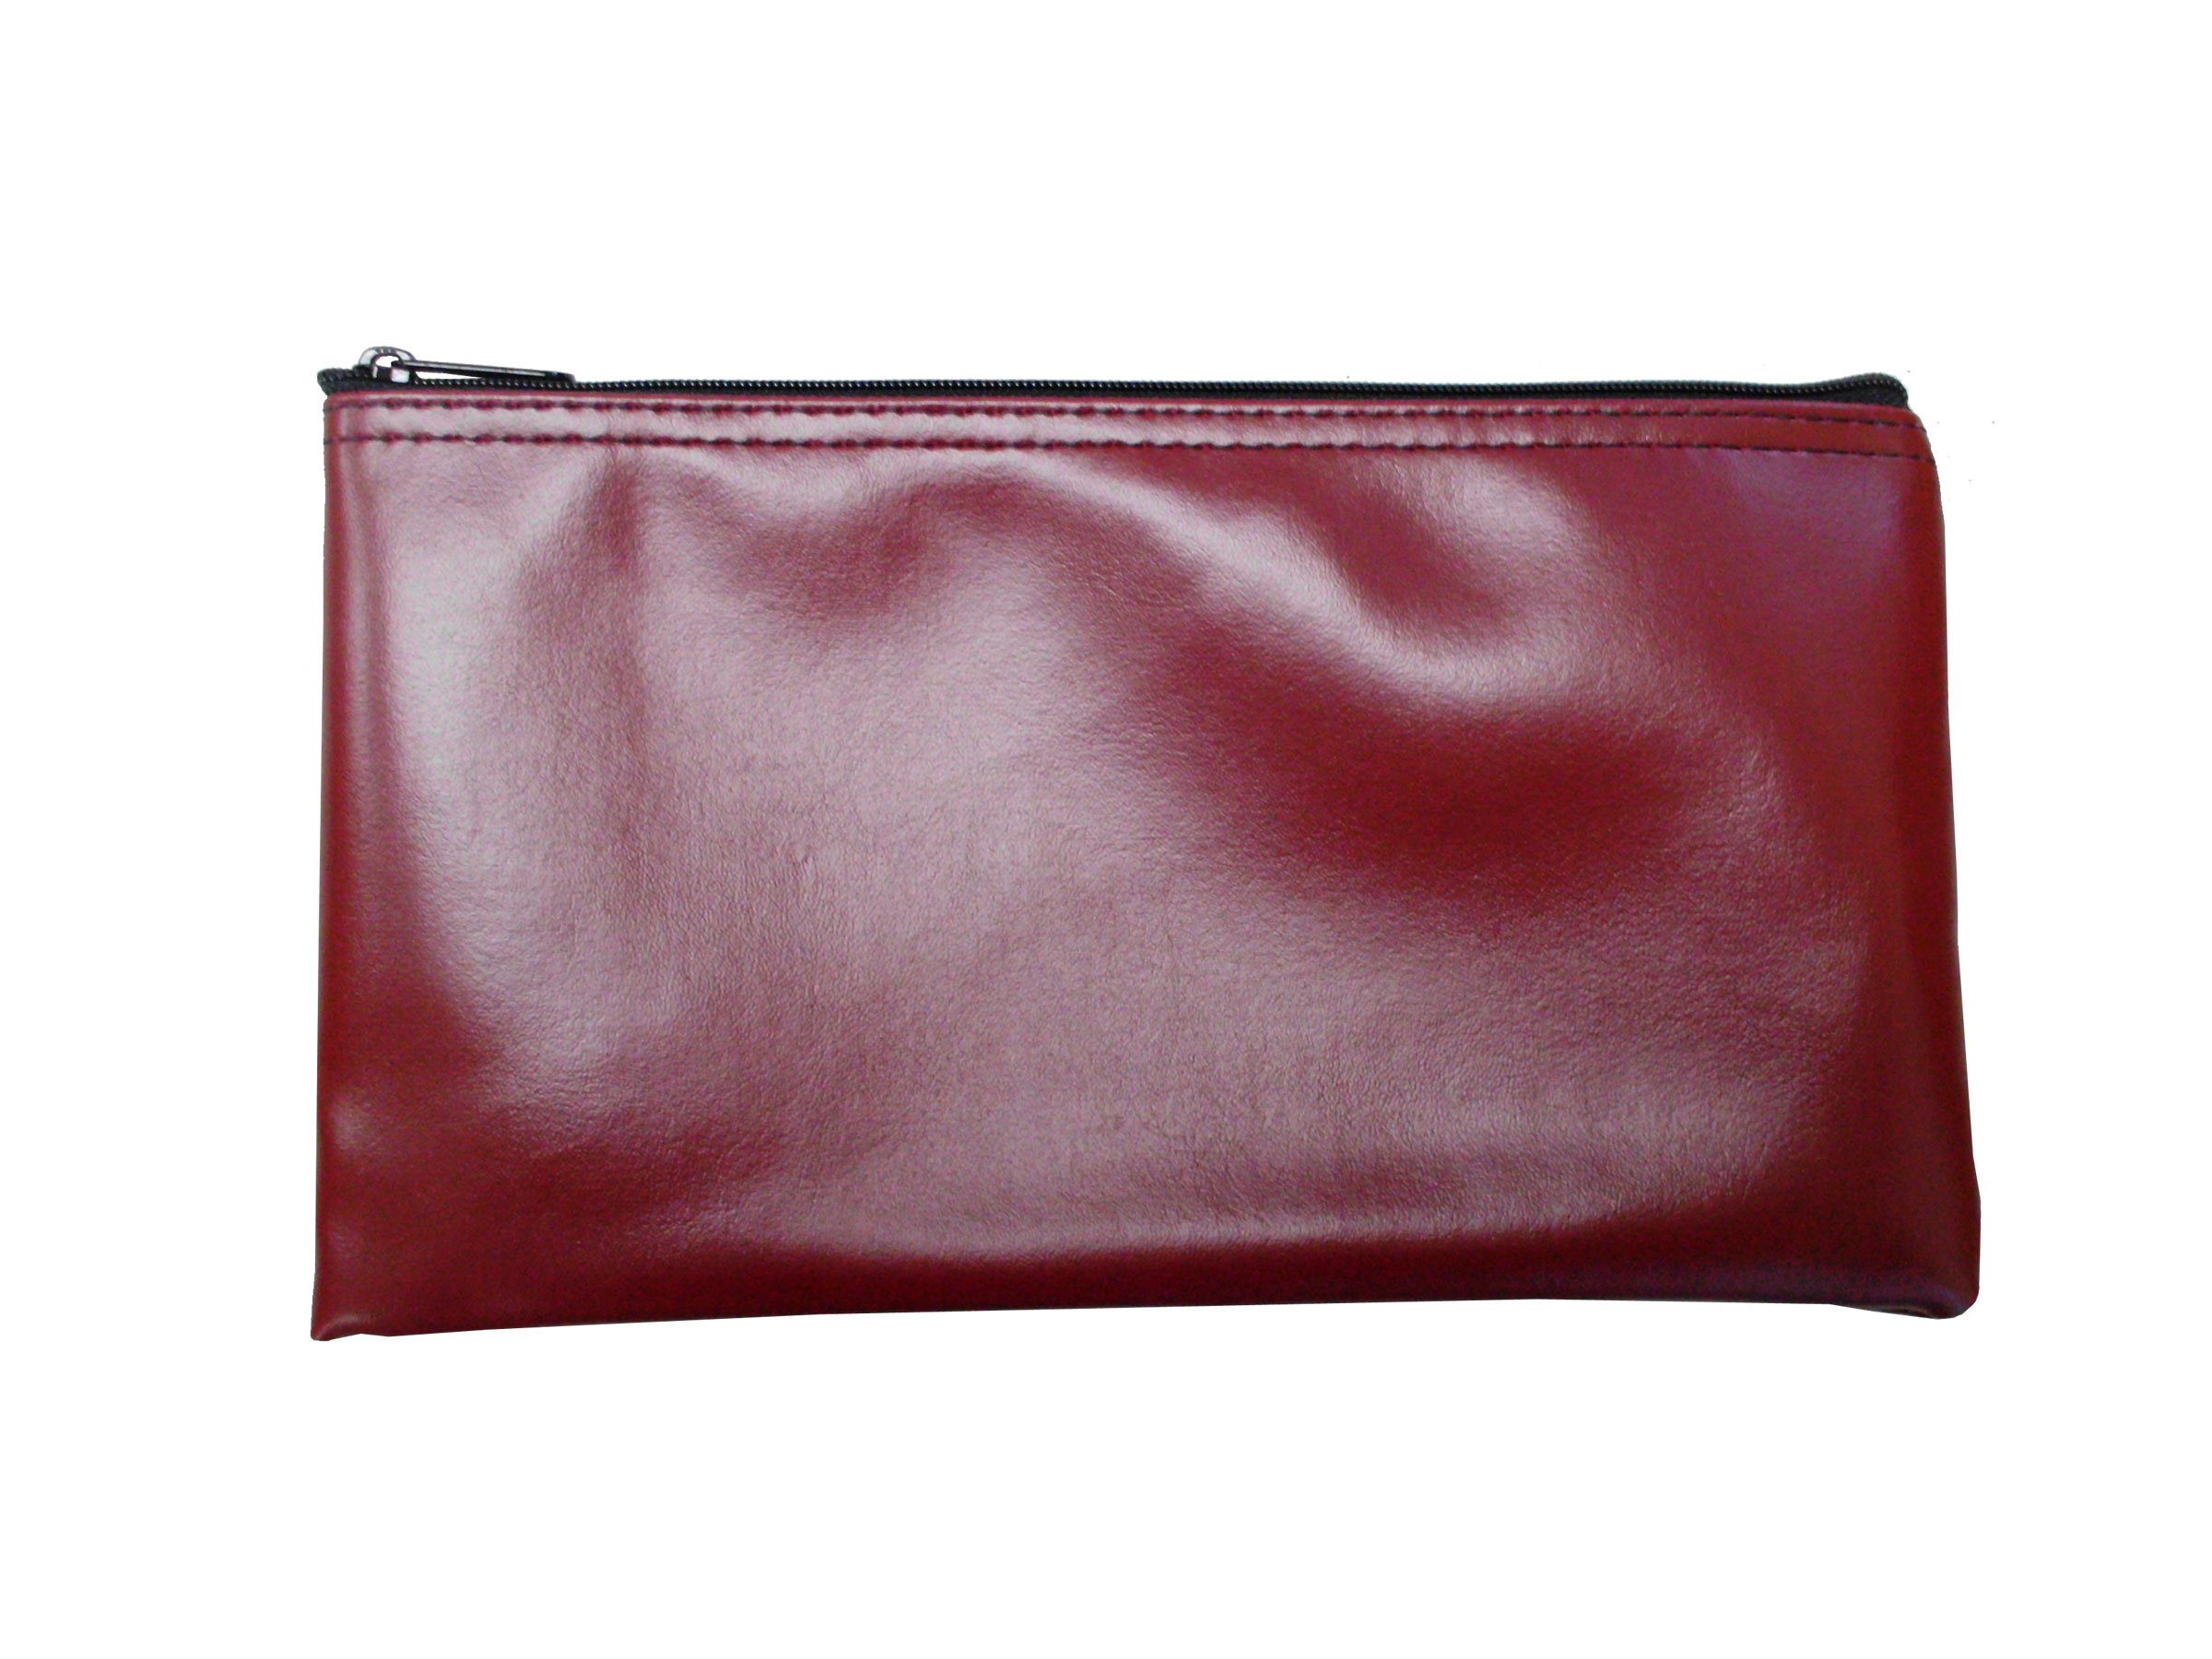 cardinal bag supplies Vinyl Zipper Bags Leatherette 11 x 6 inches Small compact Burgundy 1 Zippered Pouch cW